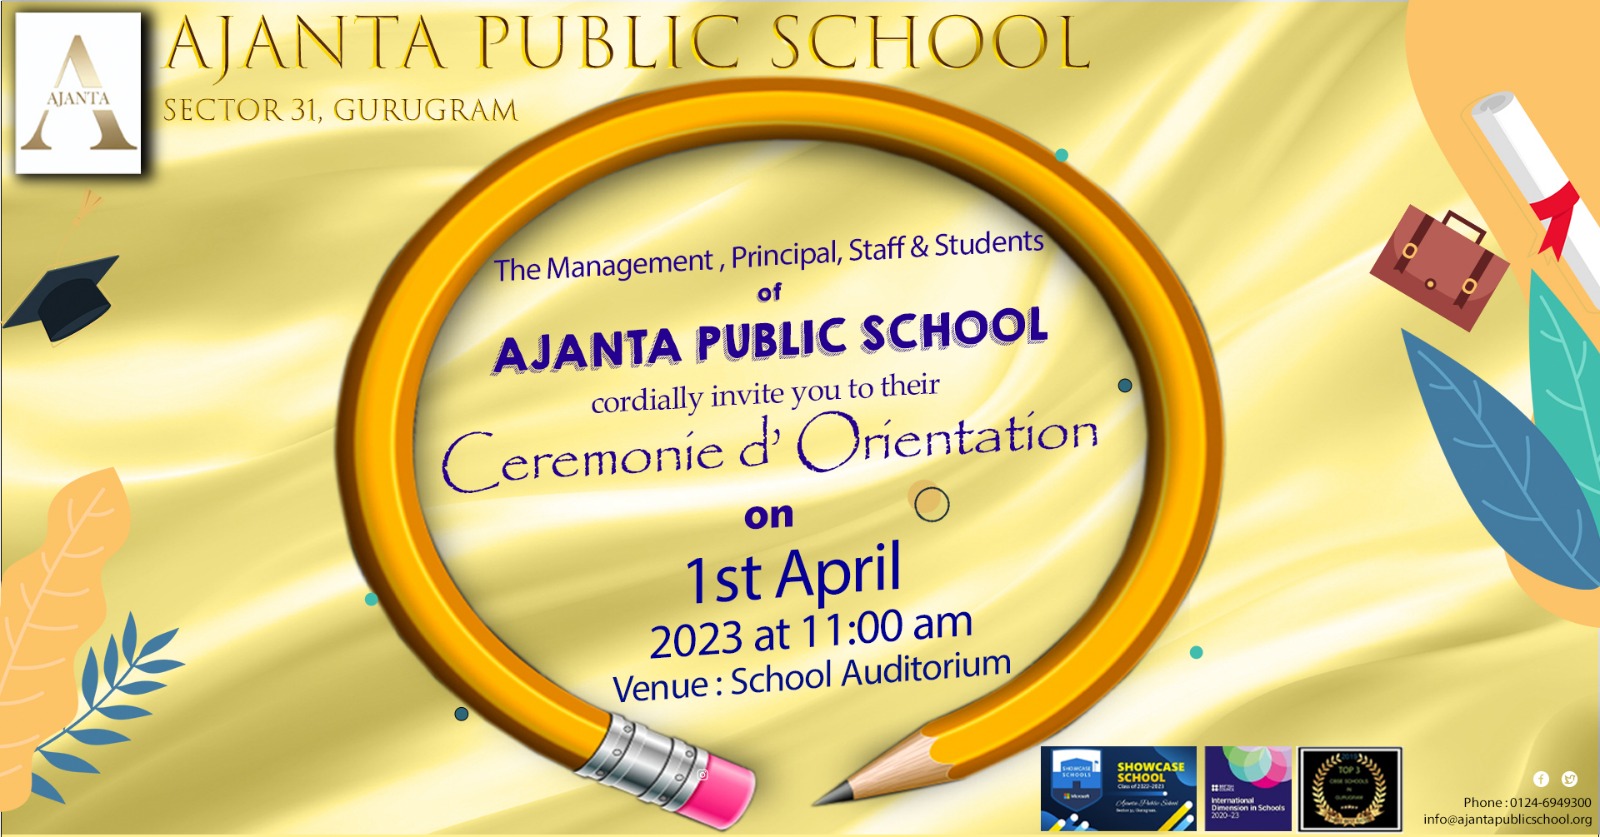 The AJANTA PUBLIC SCHOOL Gurugram is pleased to extend a warm invitation to attend their Ceremonie d’ Orientation